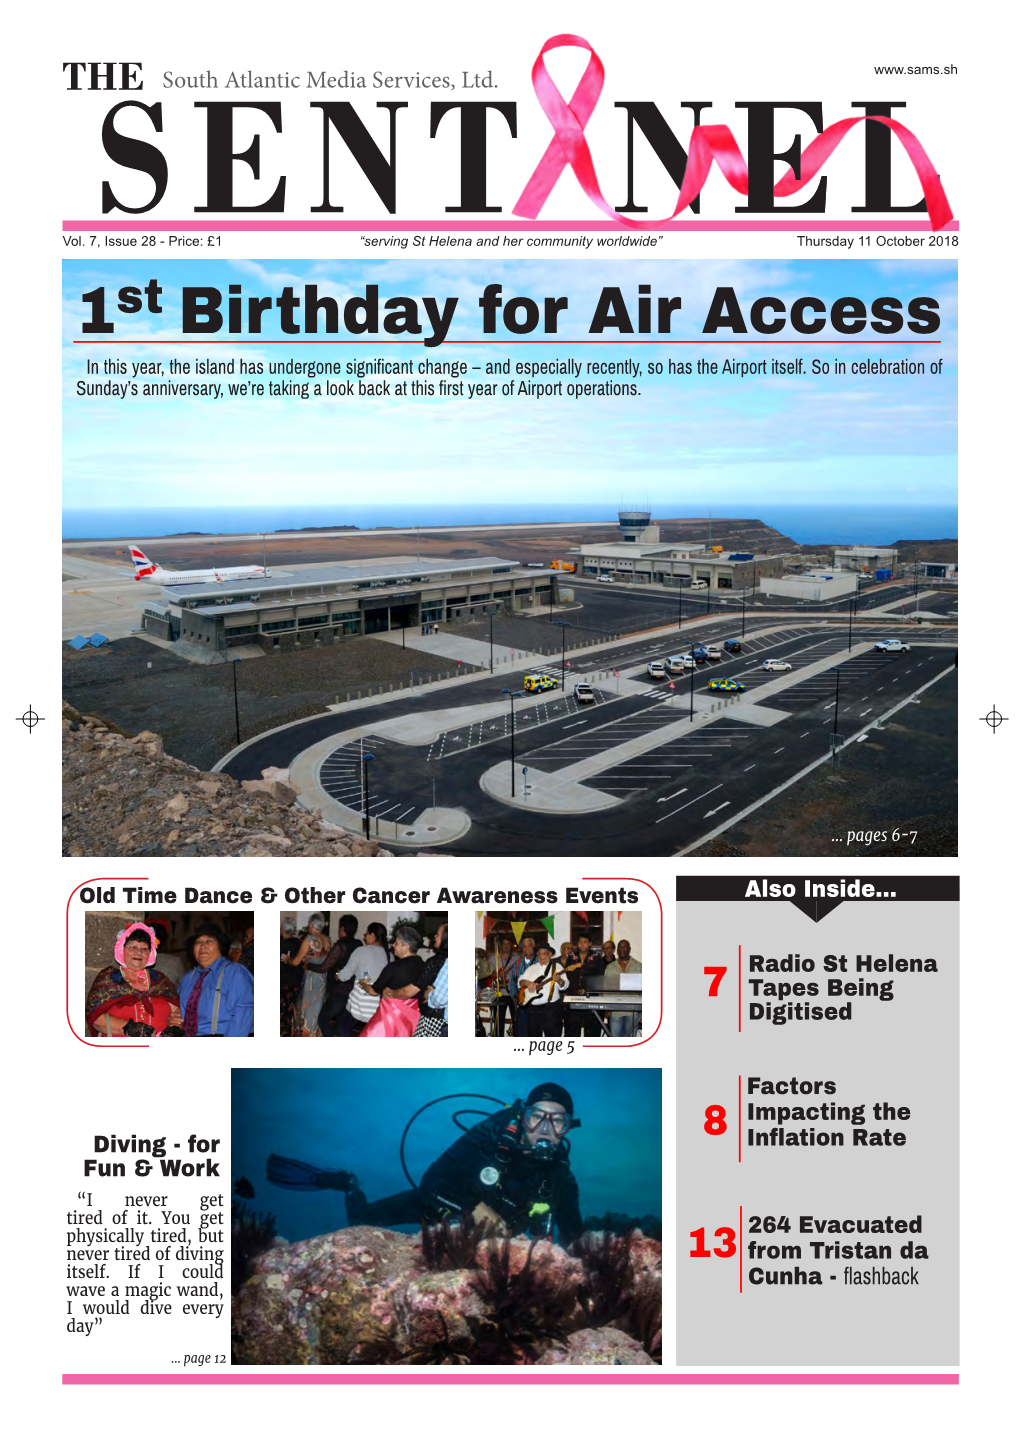 1St Birthday for Air Access in This Year, the Island Has Undergone Significant Change – and Especially Recently, So Has the Airport Itself